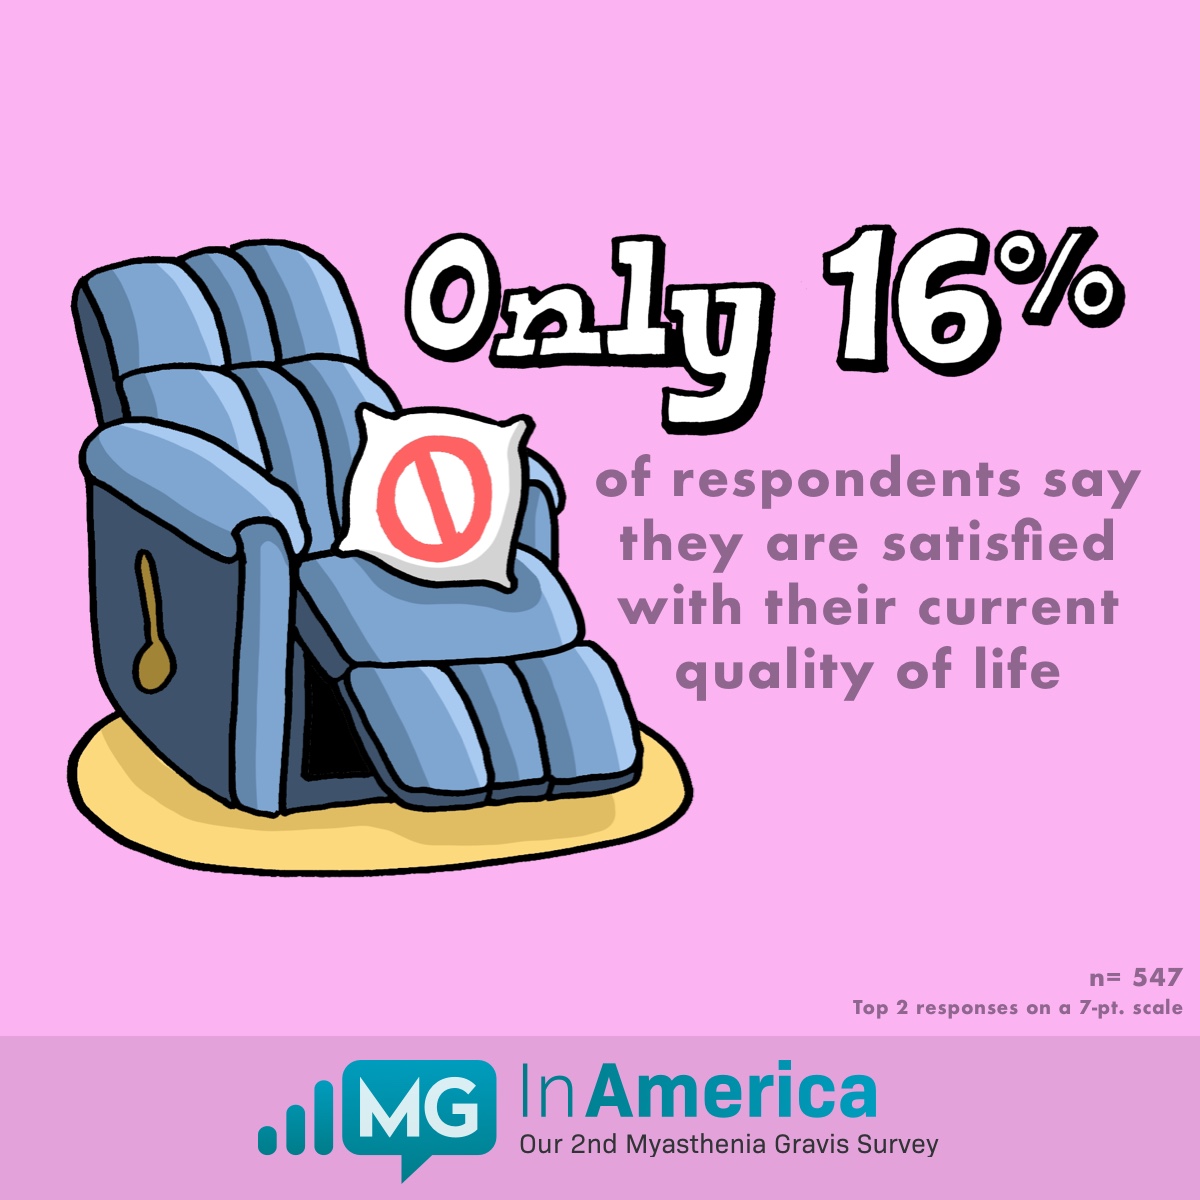 Only 16% of respondents say they are satisfied with their current quality of life.